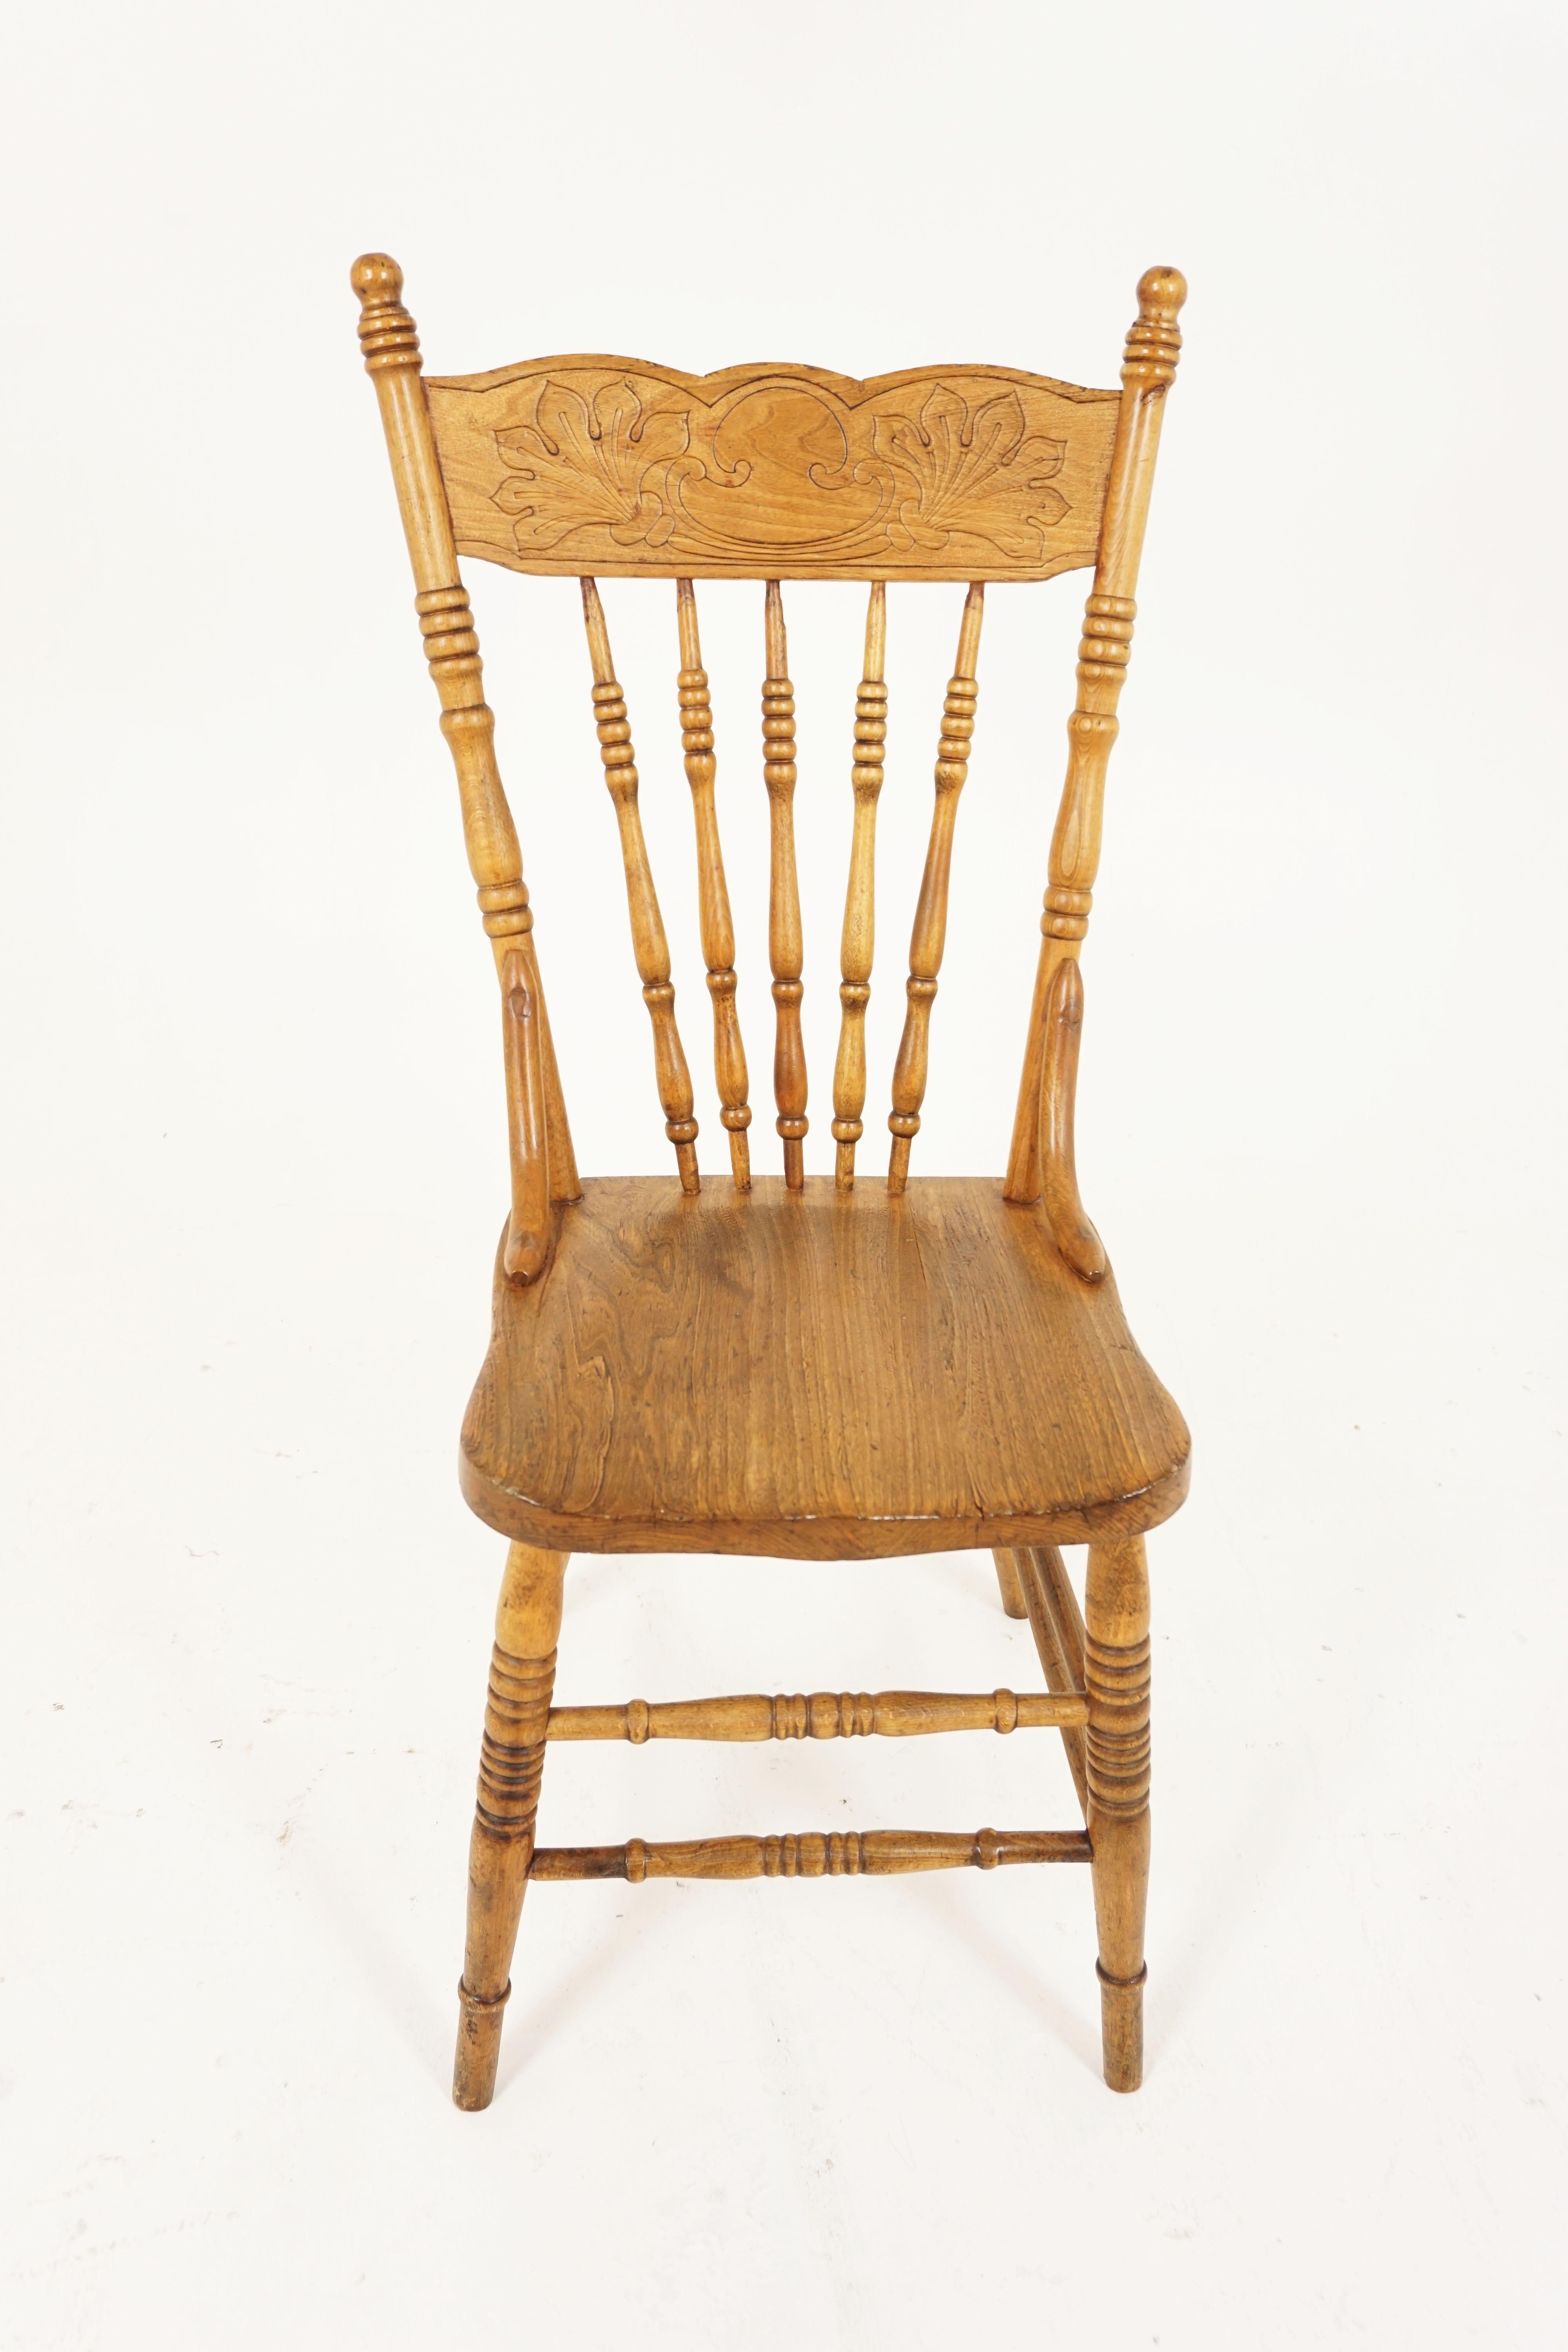 Hand-Crafted Antique Chairs, Set of 5, Ash Presstack Chairs, Solid Seats, American 1900 B2066